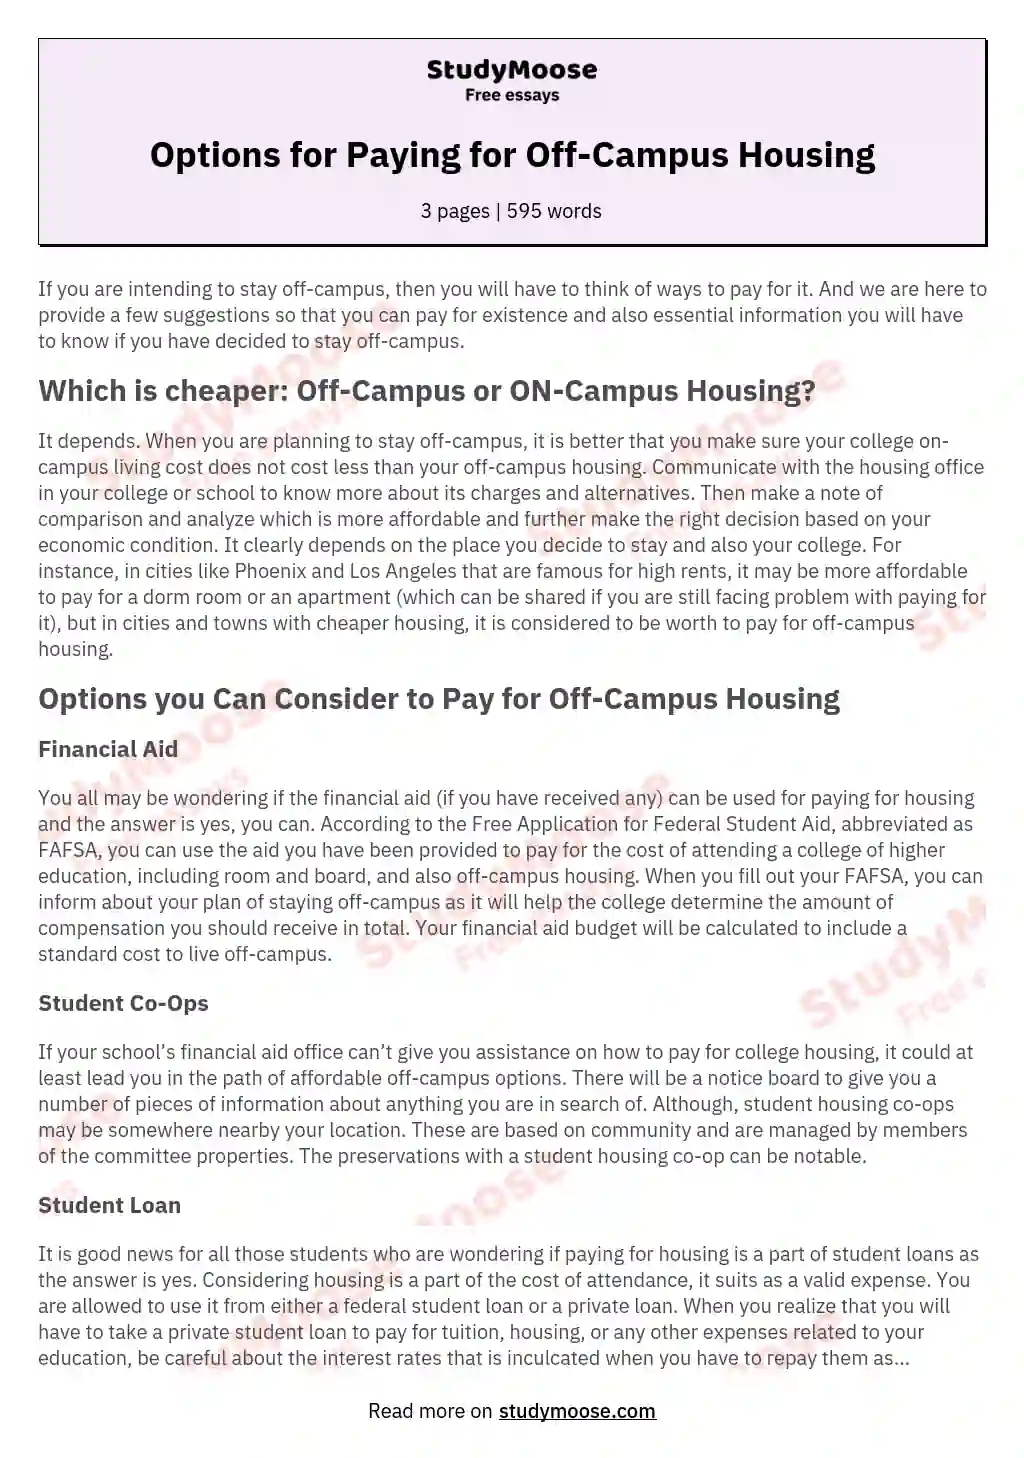 Options for Paying for Off-Campus Housing